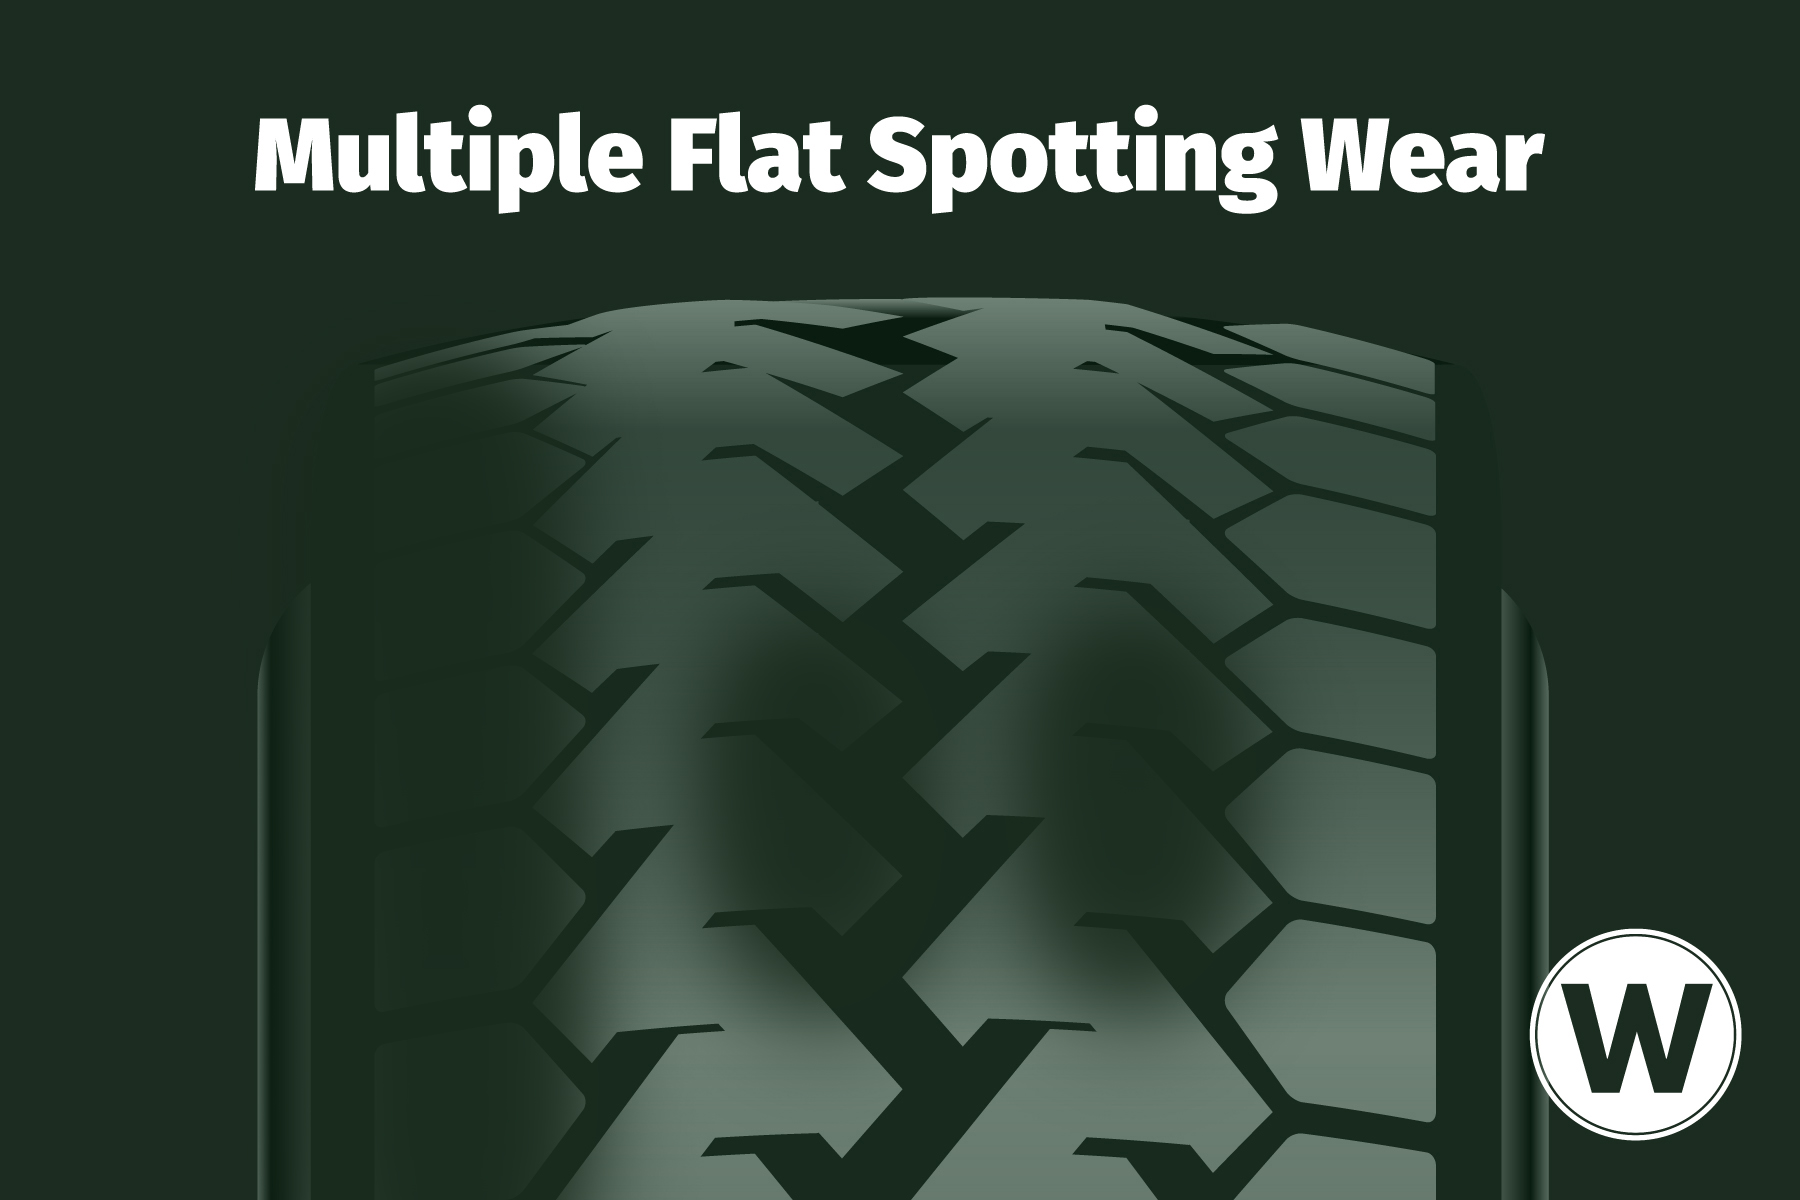 A wear pattern diagram that shows where to find multiple flat spotting wear on your commercial steer tires.